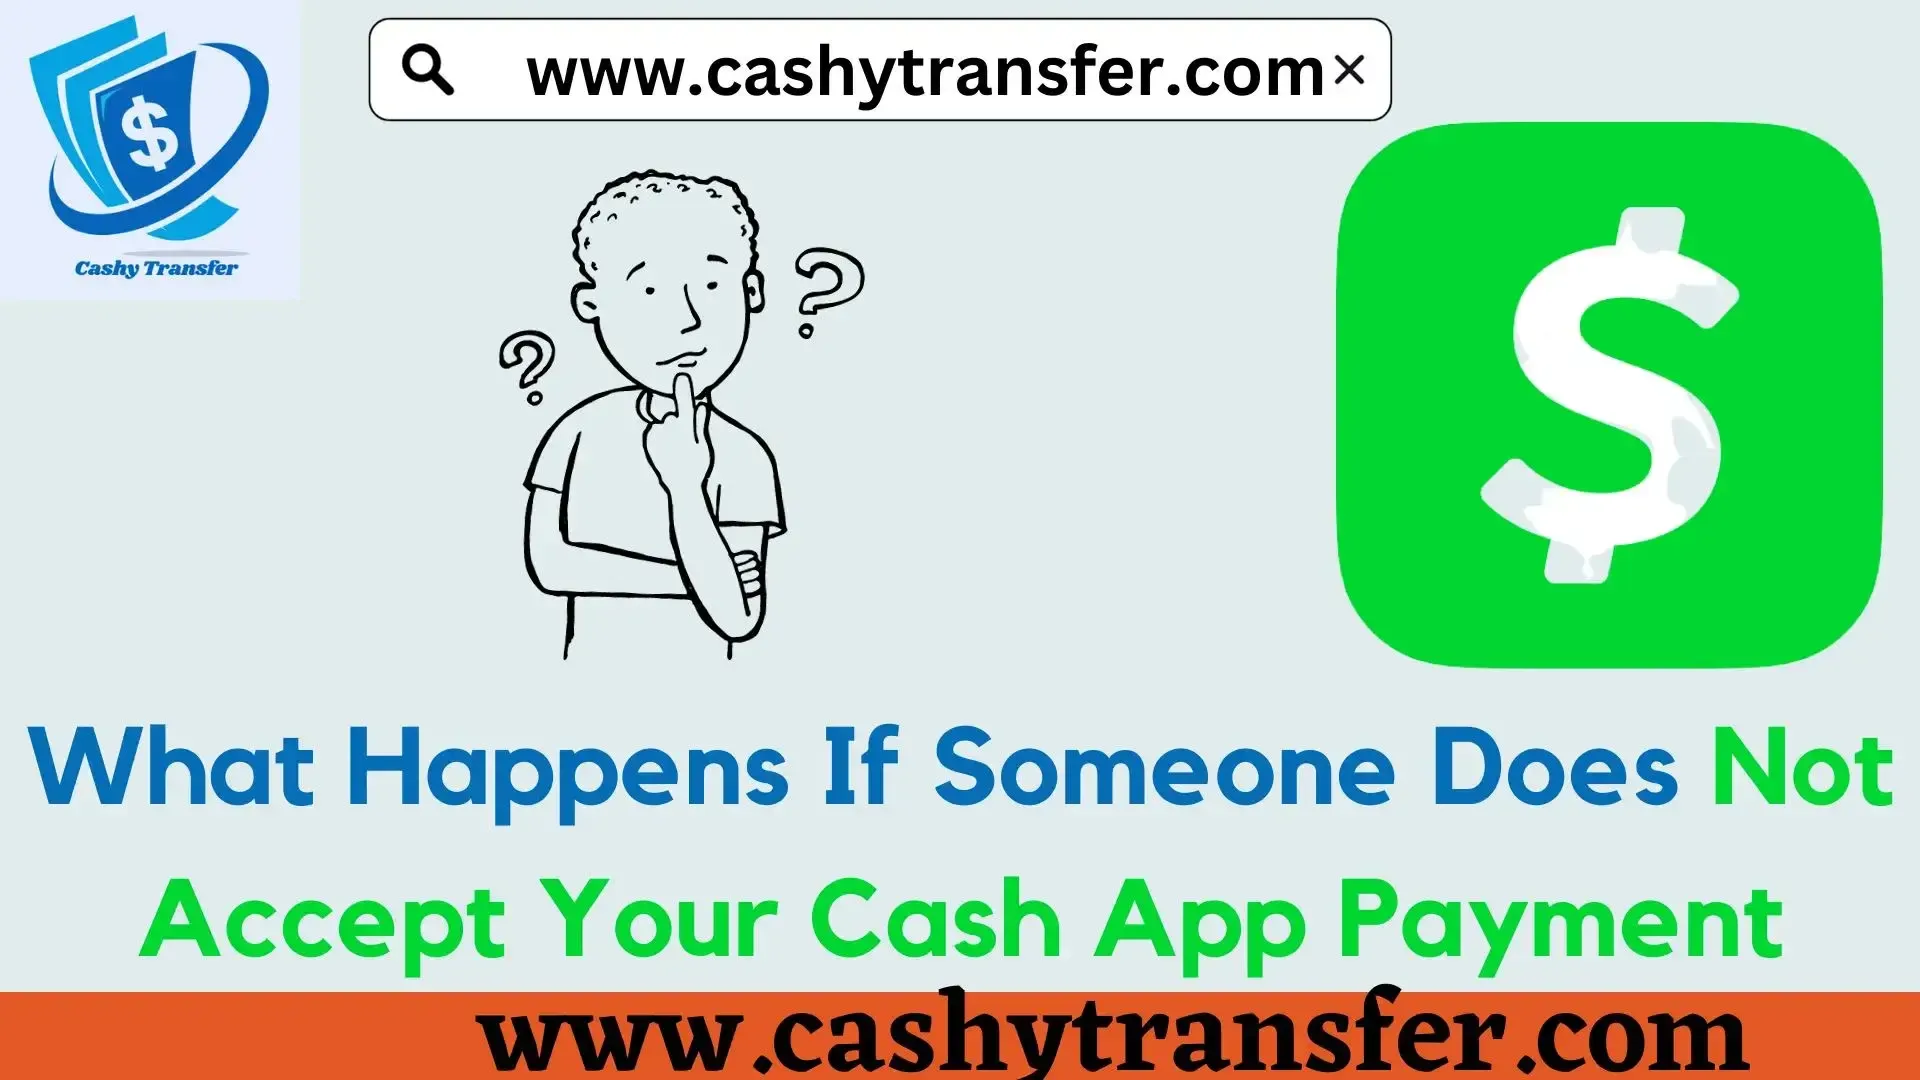 Someone Does Not Accept Your Cash App Payment